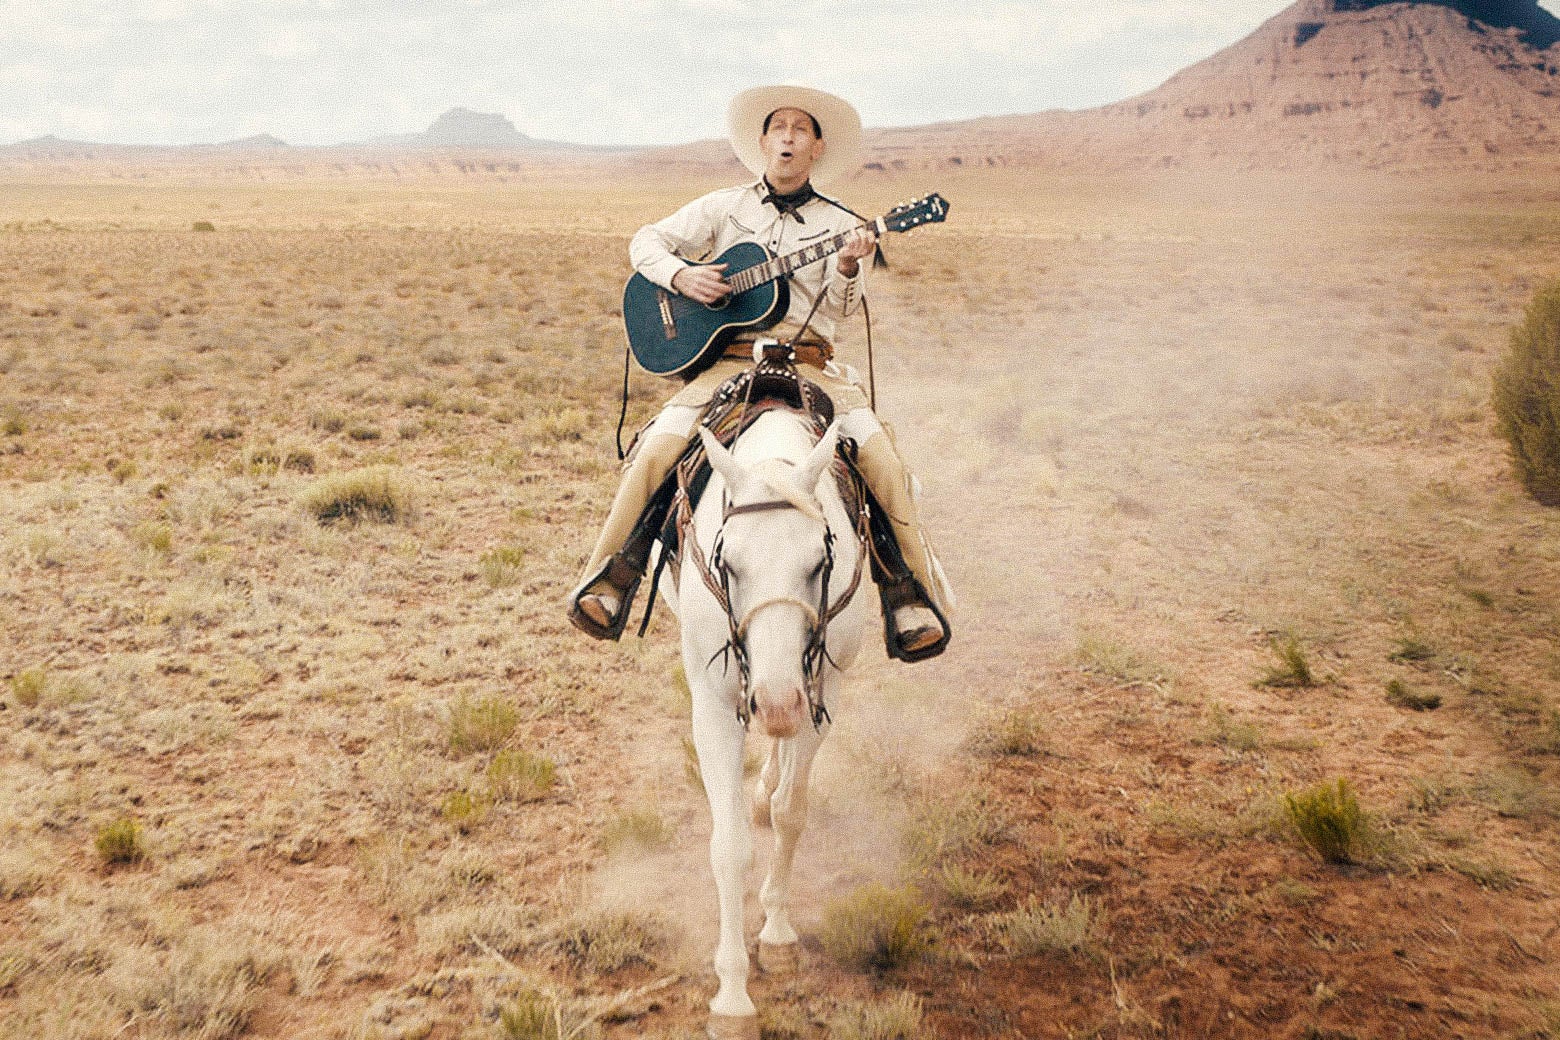 Tim Blake Nelson riding a horse and playing the guitar in this still from The Ballad of Buster Scruggs.